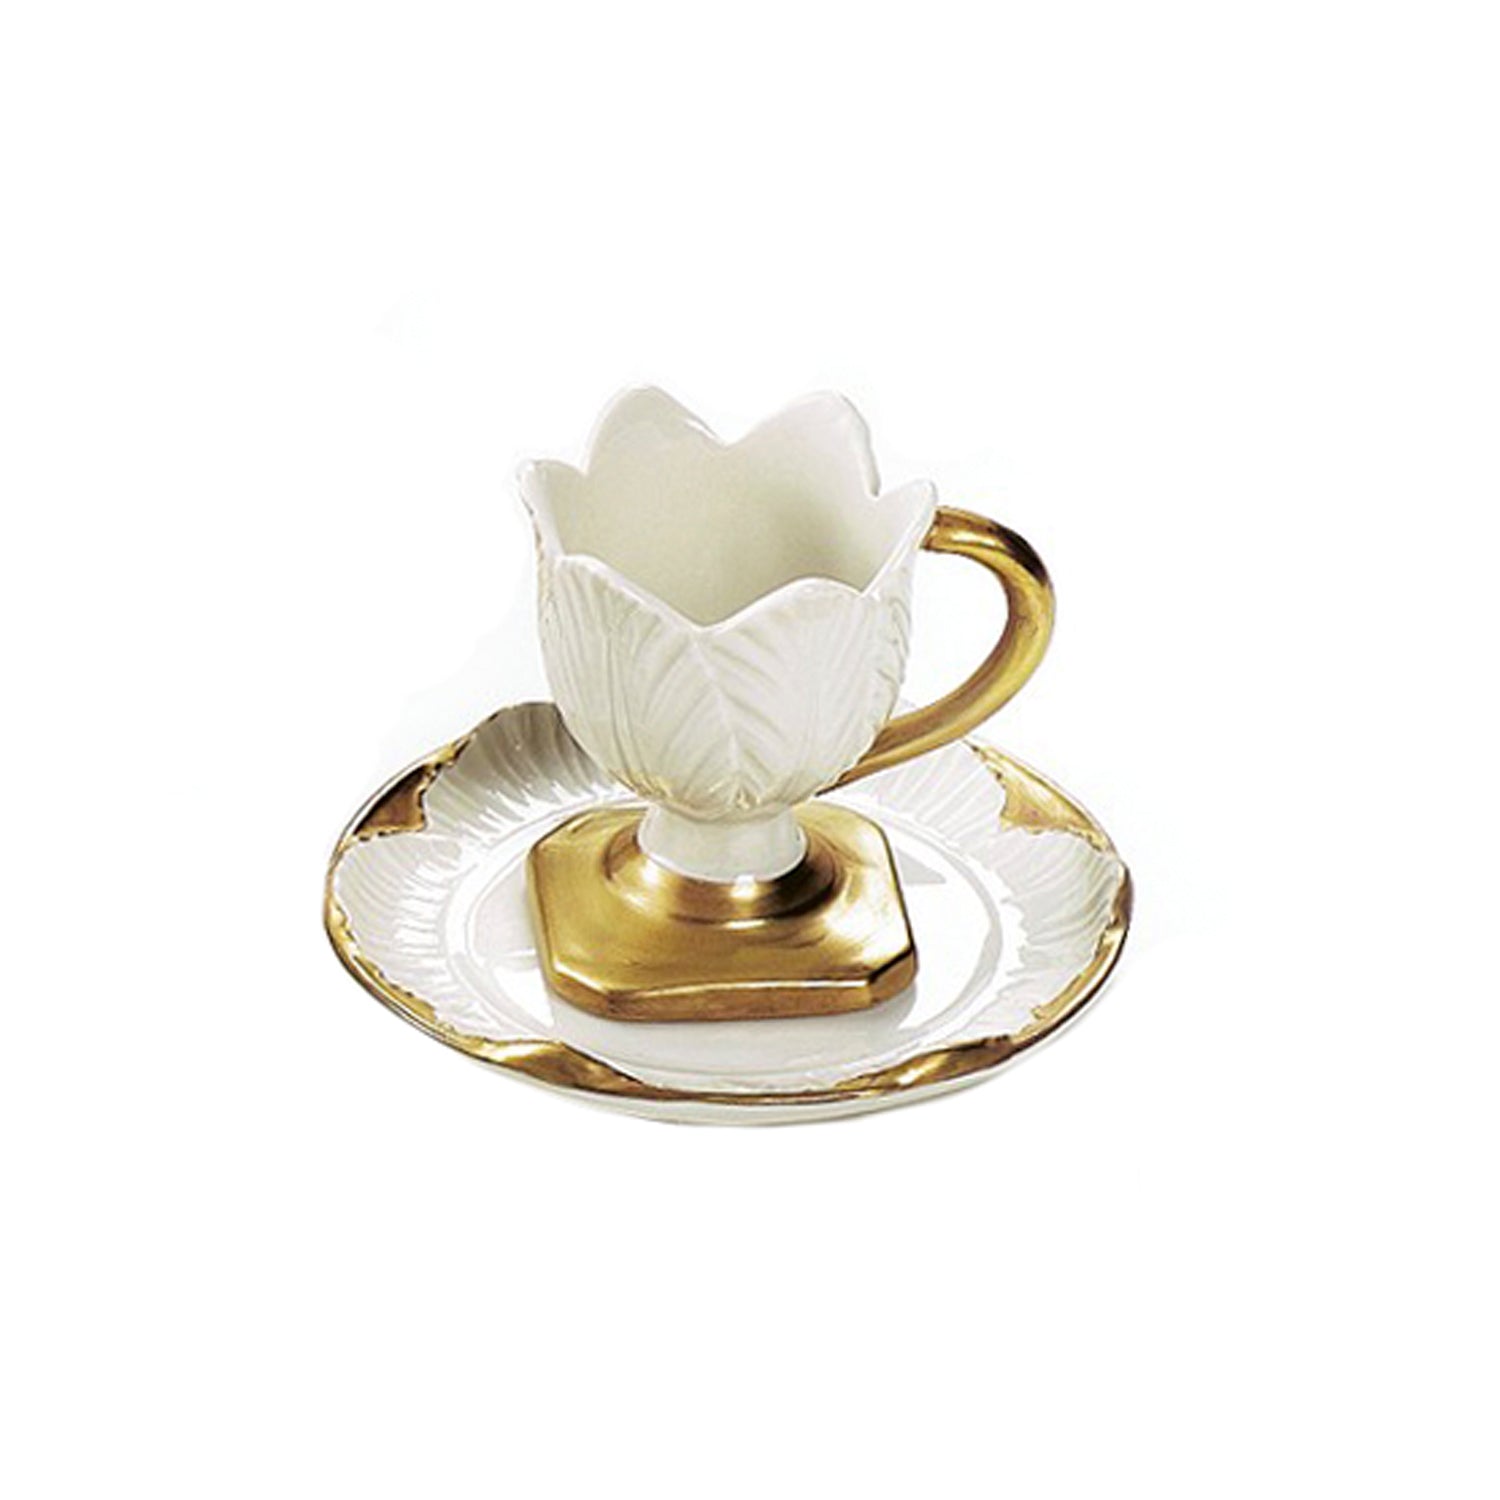 Tulip Egg Cup And Saucer - White & Gold